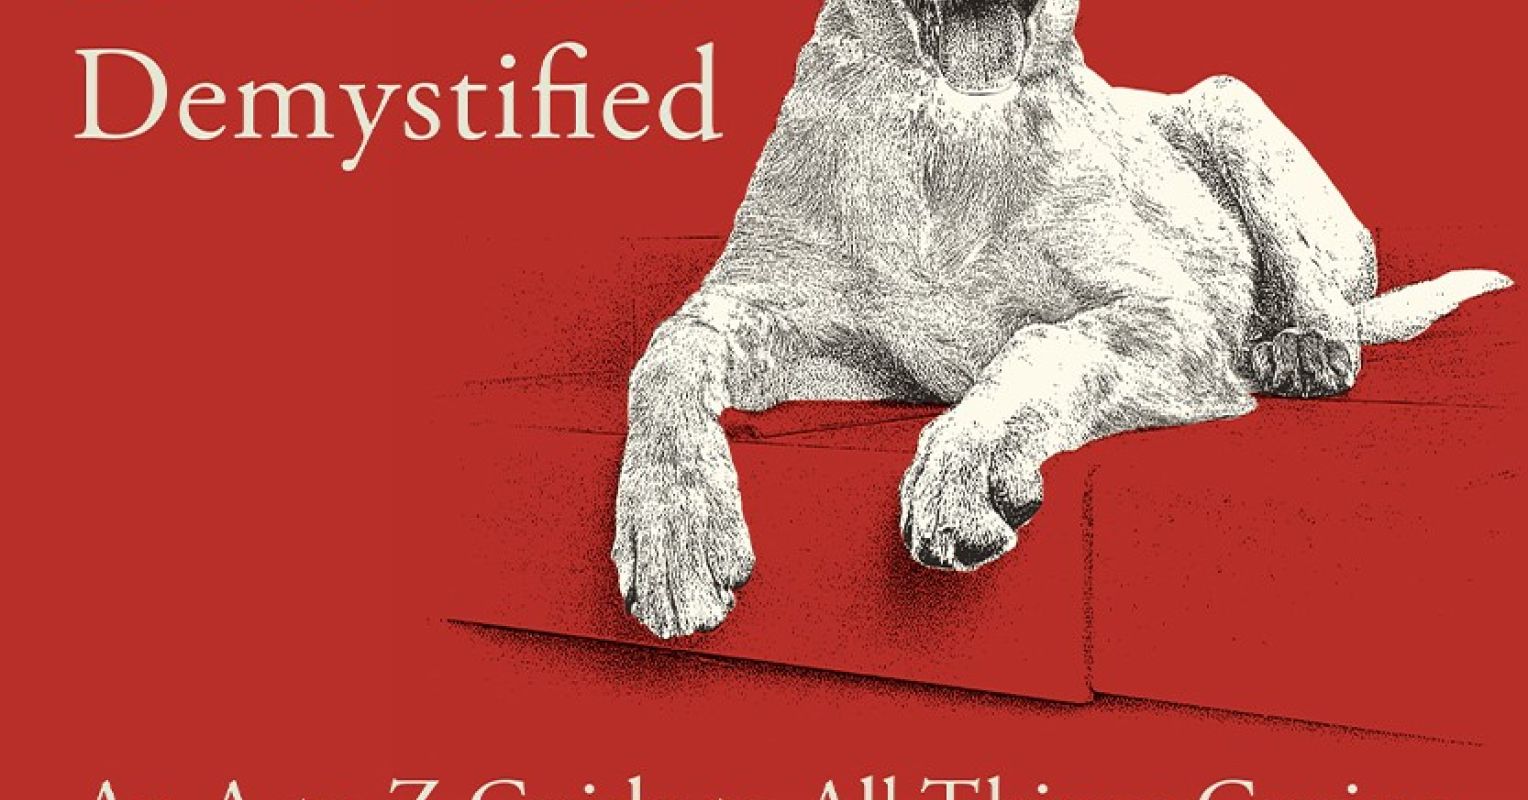 Dogs Demystified: A Delightful Guide to All Things Canine